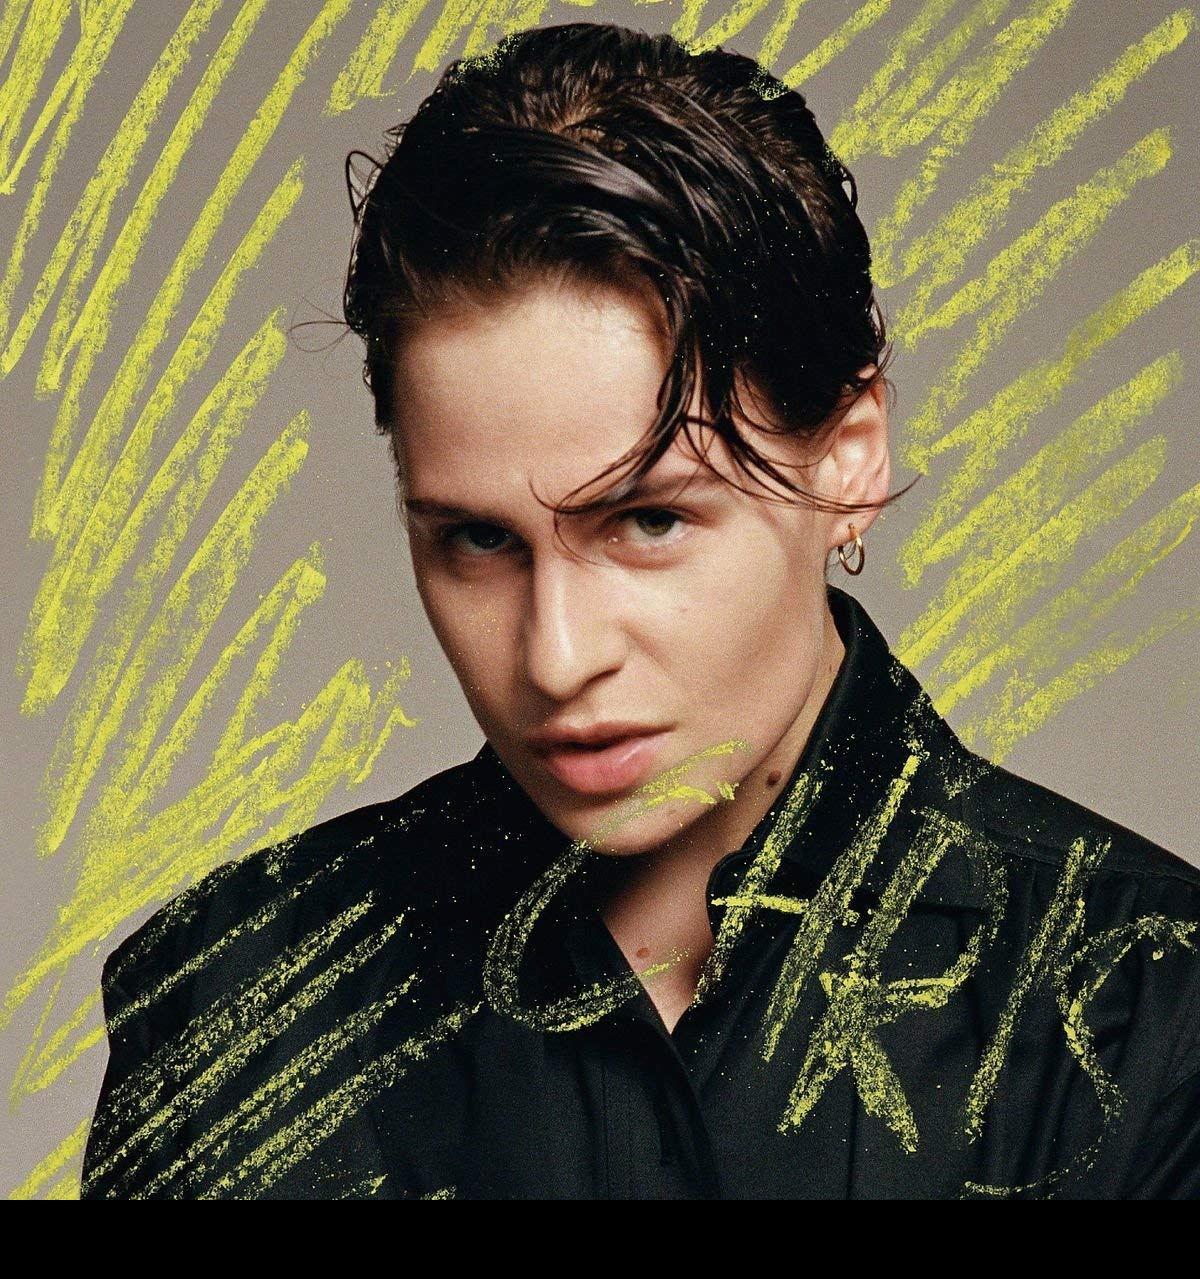 La chanteuse Christine and the Queens sous son nouvel avatar "Chris". [Because Music - Christine and the Queens]